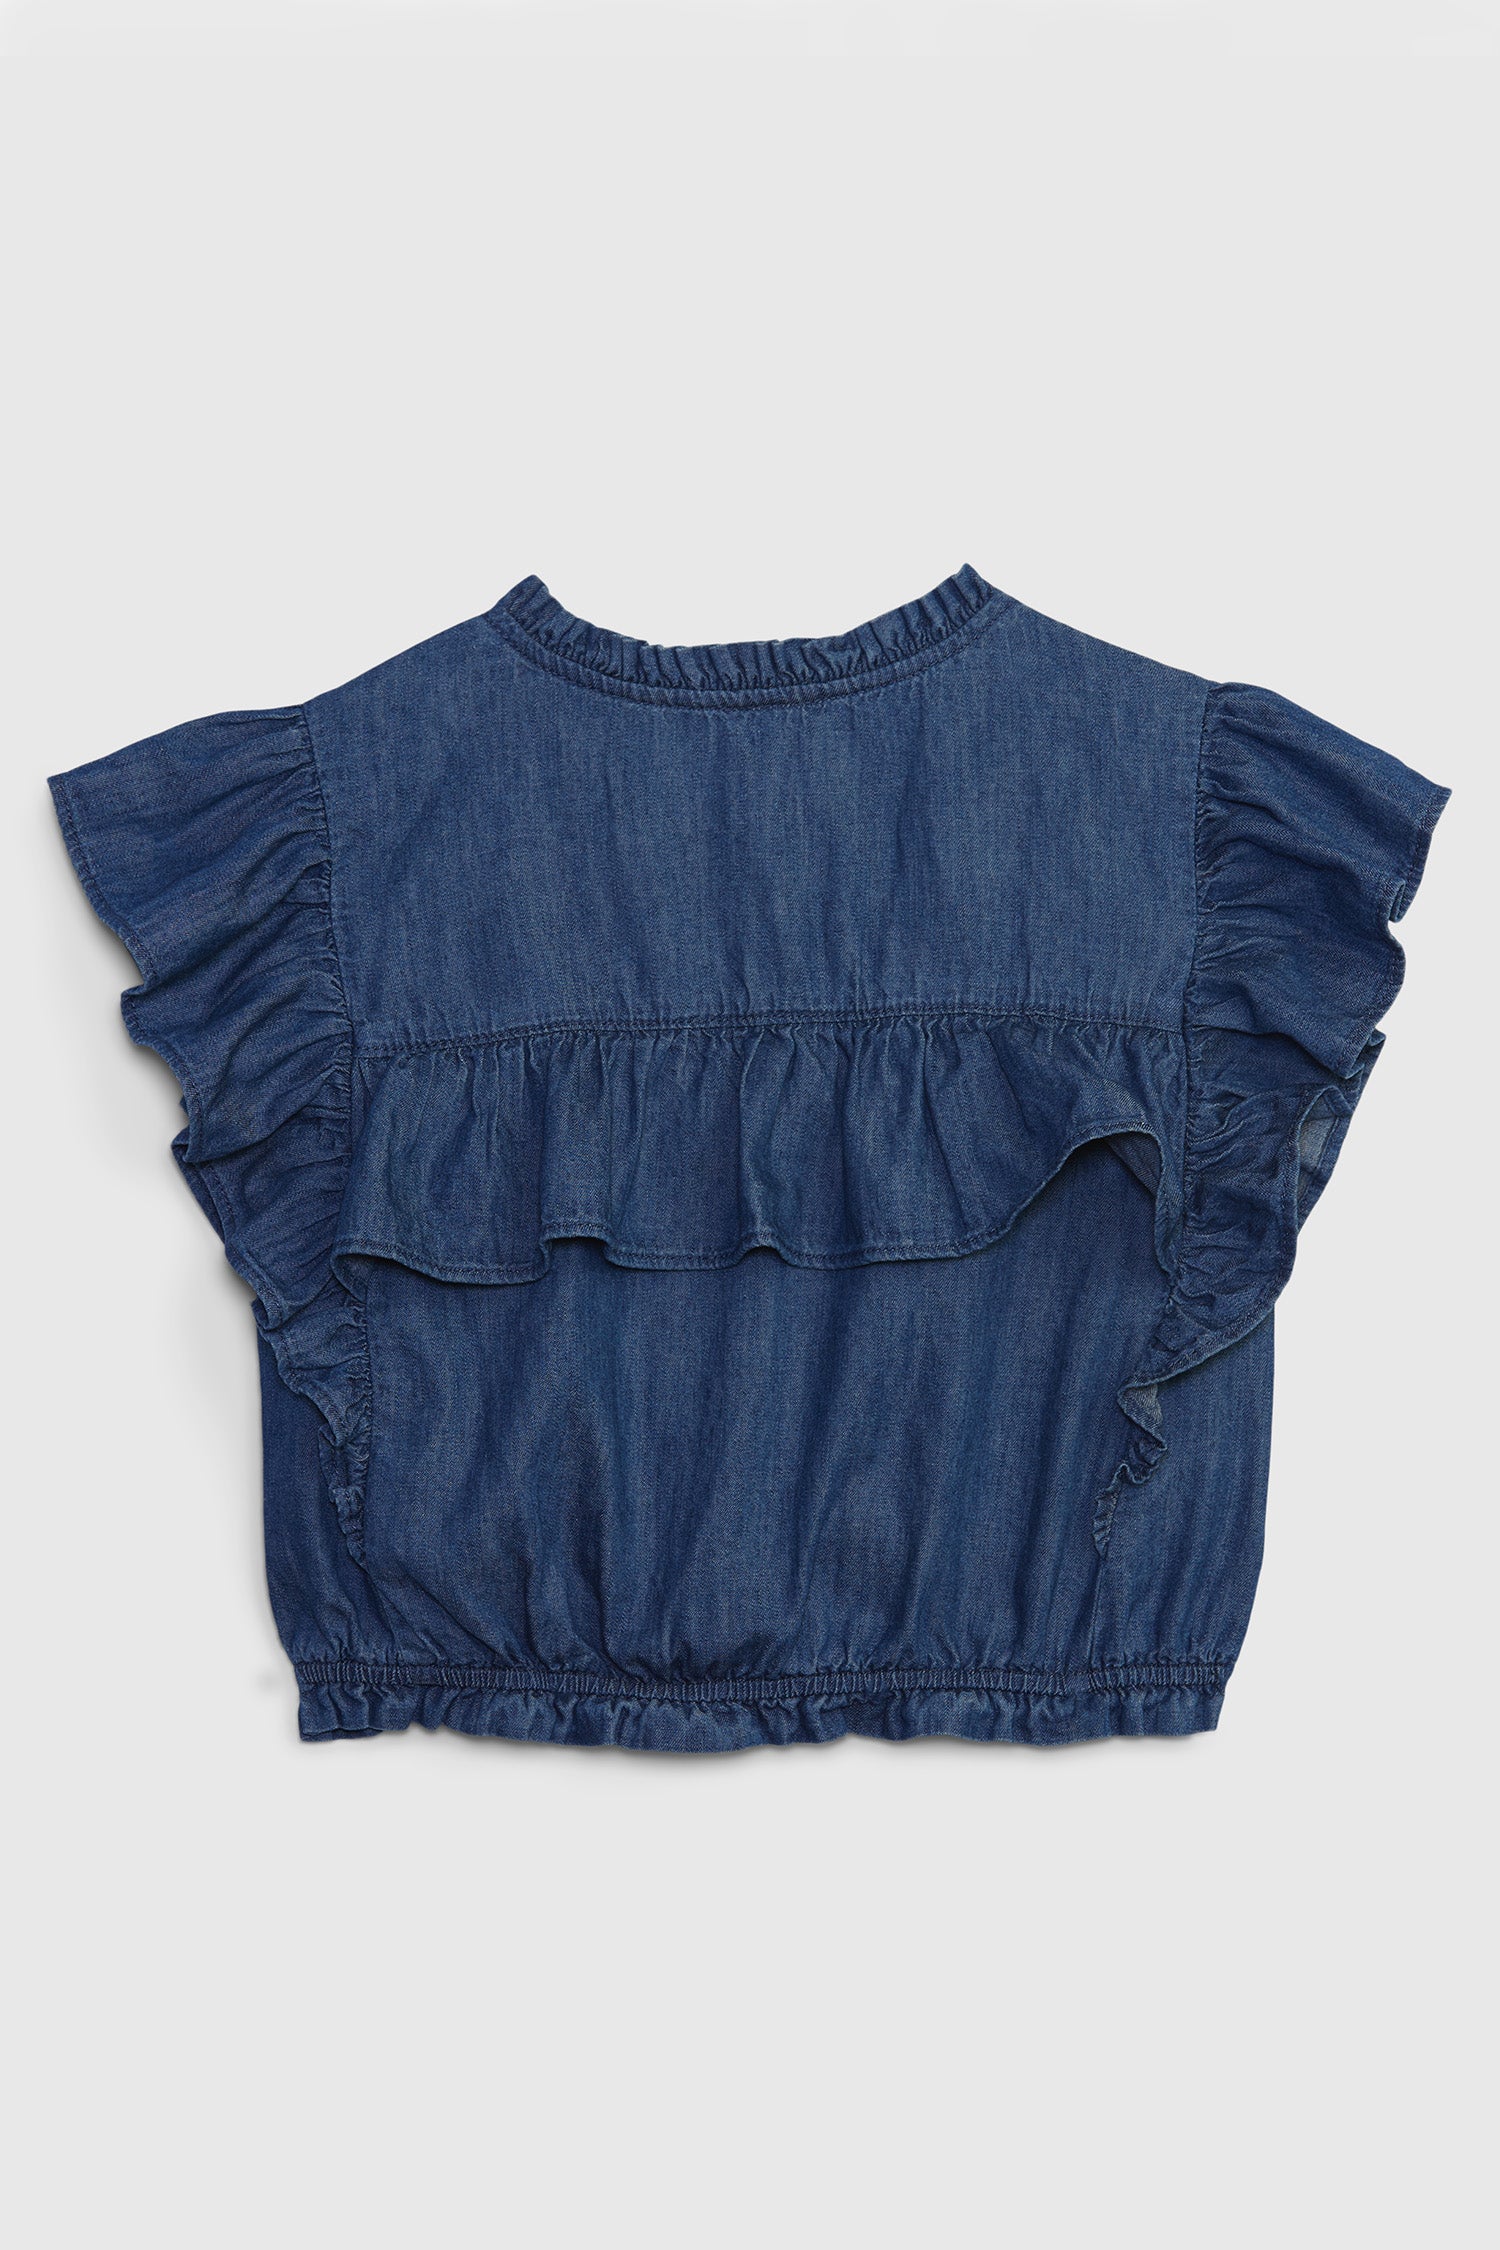 Back image of kids denim ruffle top with buttons at front and ruffled short sleeves. Has a ruffle going across the back. 